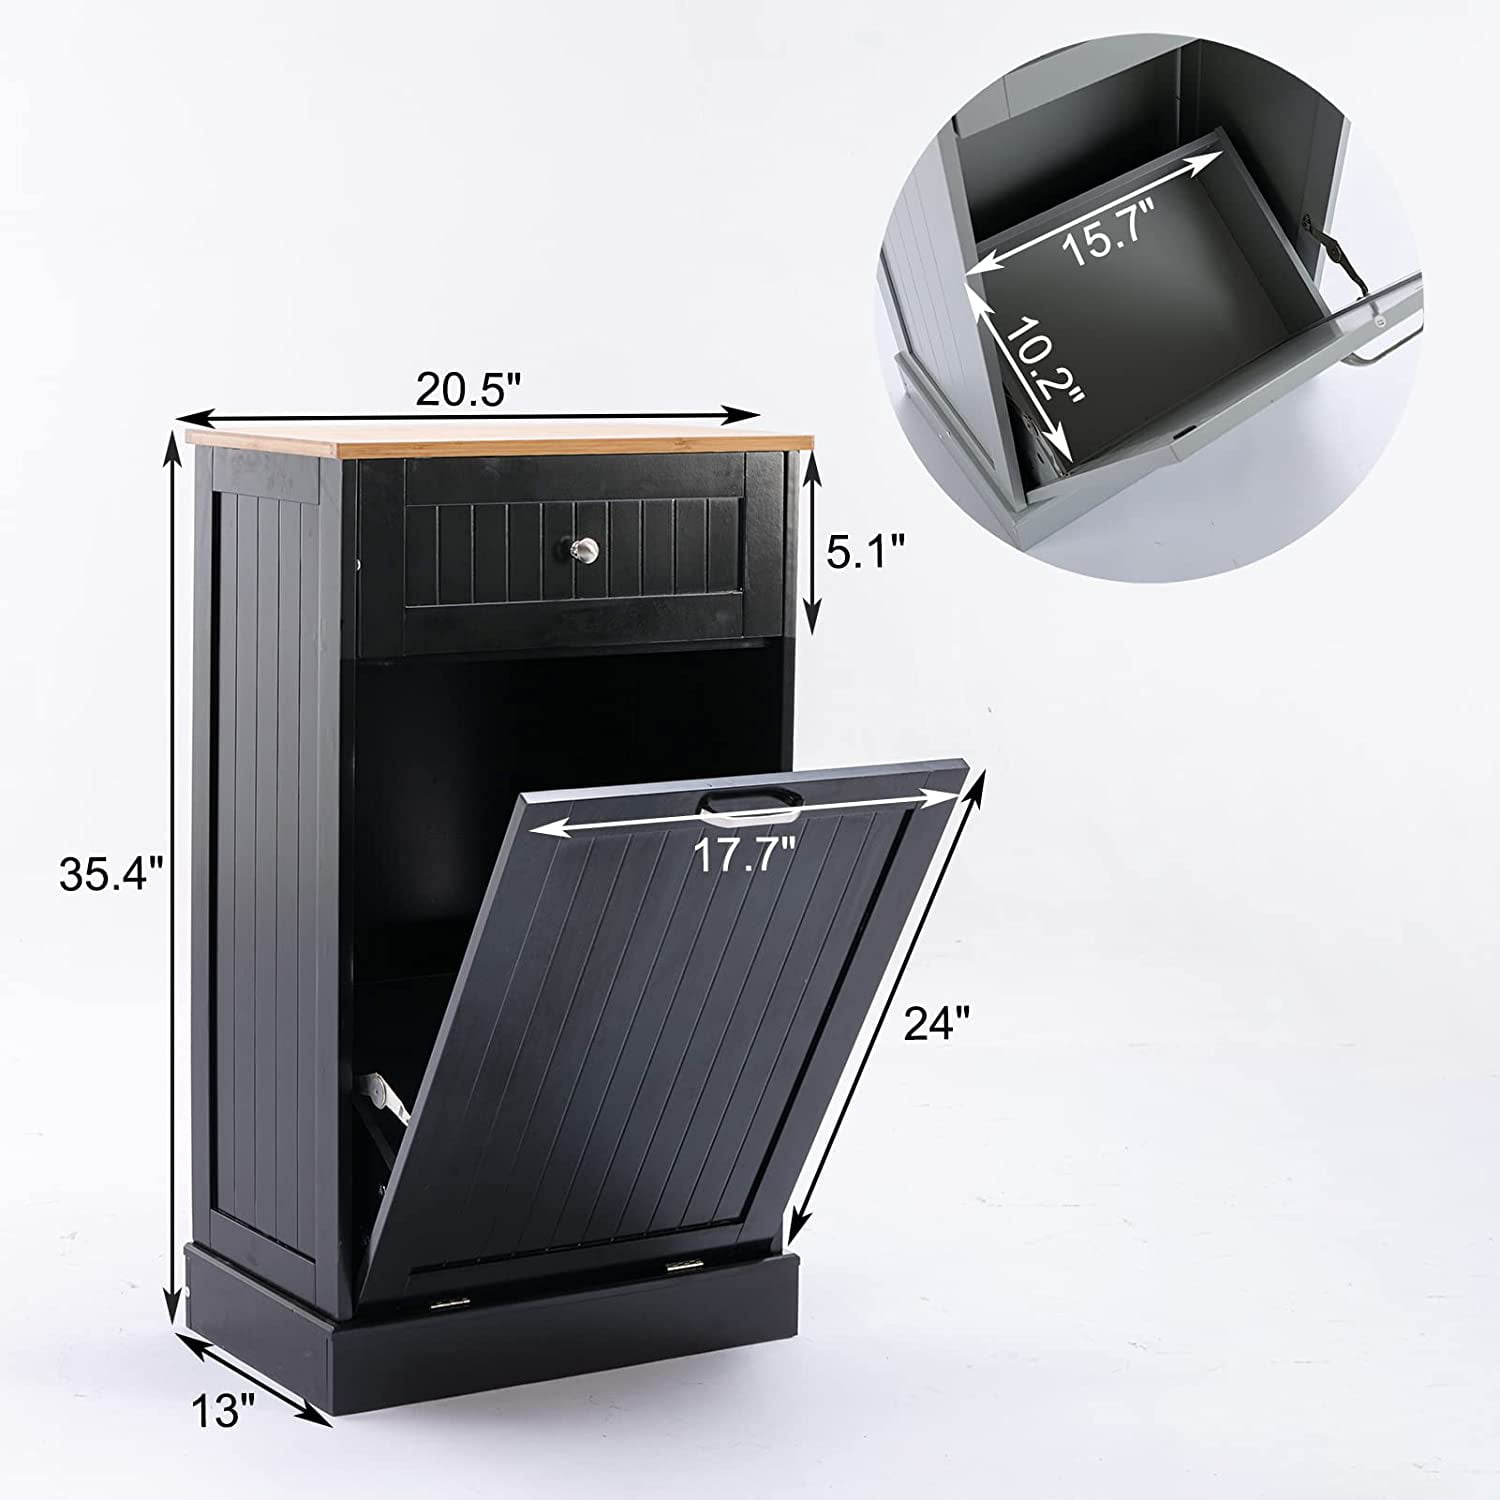 Dropship Kitchen Tilt Out Trash Bin Cabinet Free Standing Recycling Cabinet  Trash Can Holder With Drawer, Black-AS to Sell Online at a Lower Price